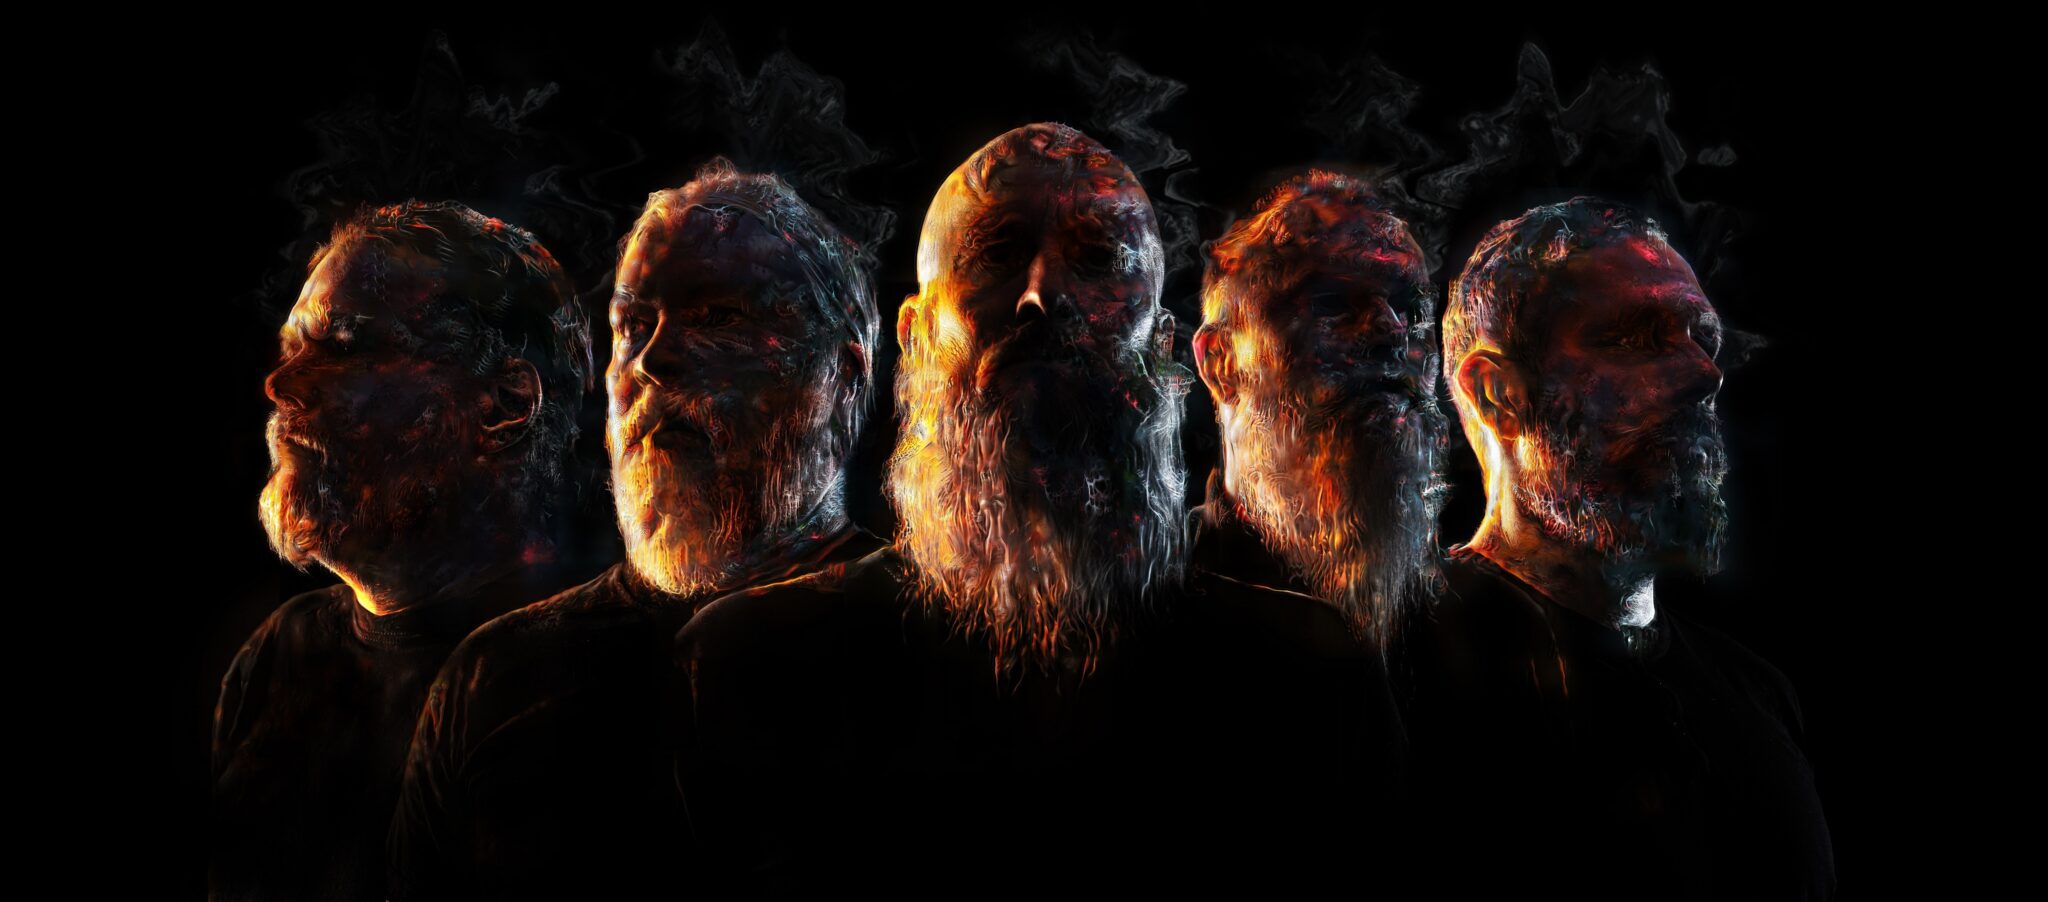 Read more about the article MESHUGGAH release an official video for the song “The Abysmal Eye”.